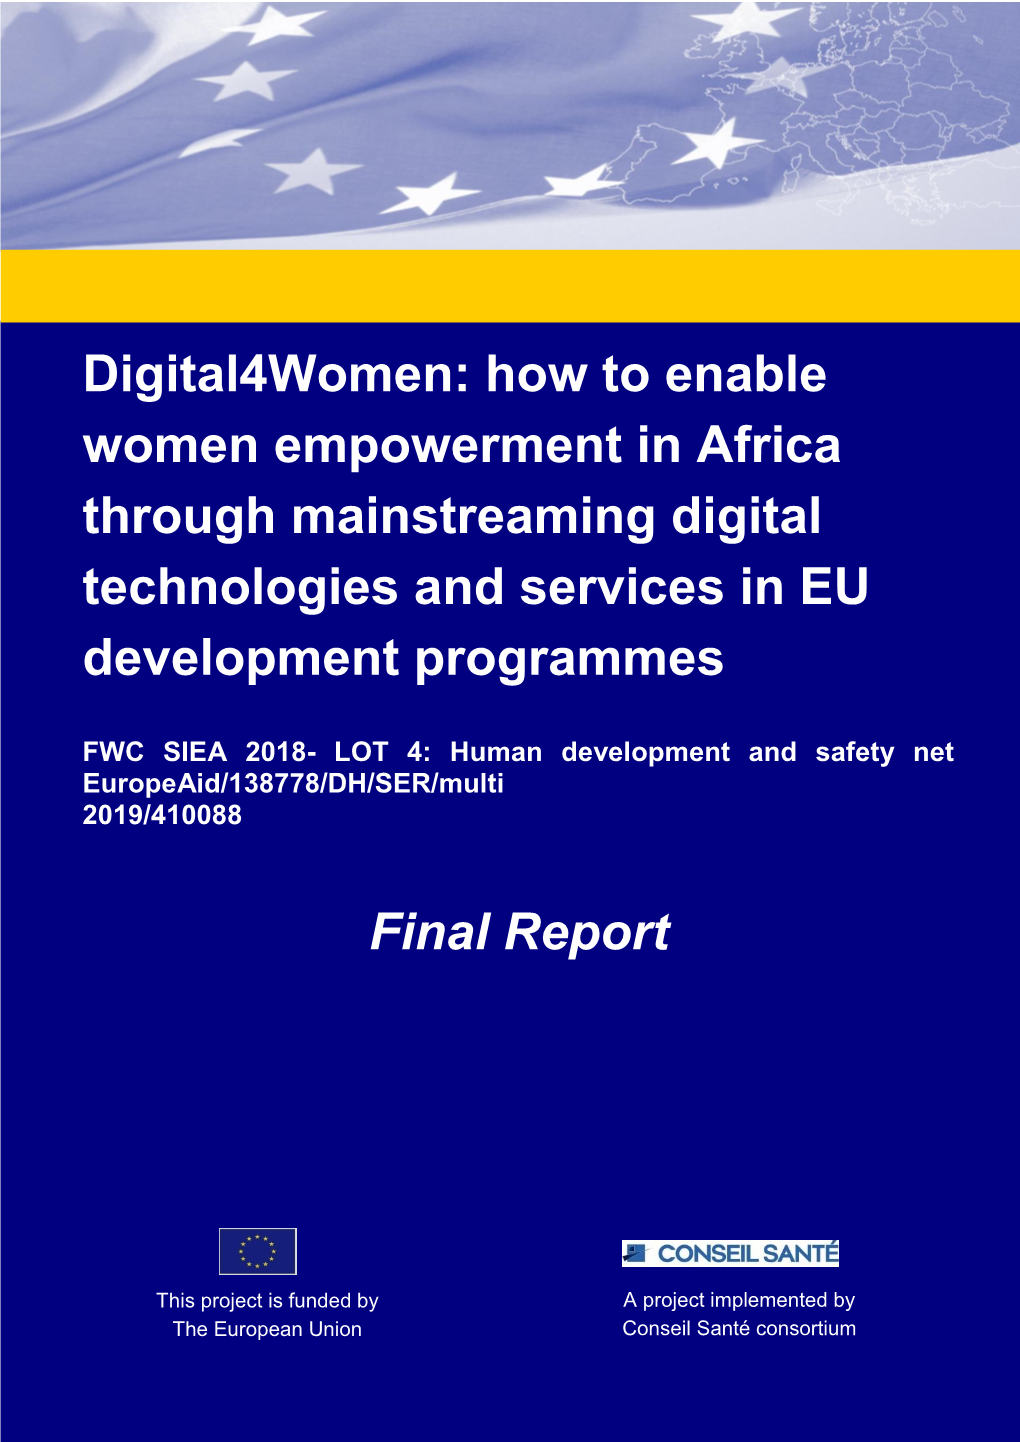 How to Enable Women Empowerment in Africa Through Mainstreaming Digital Technologies and Services in EU Development Programmes